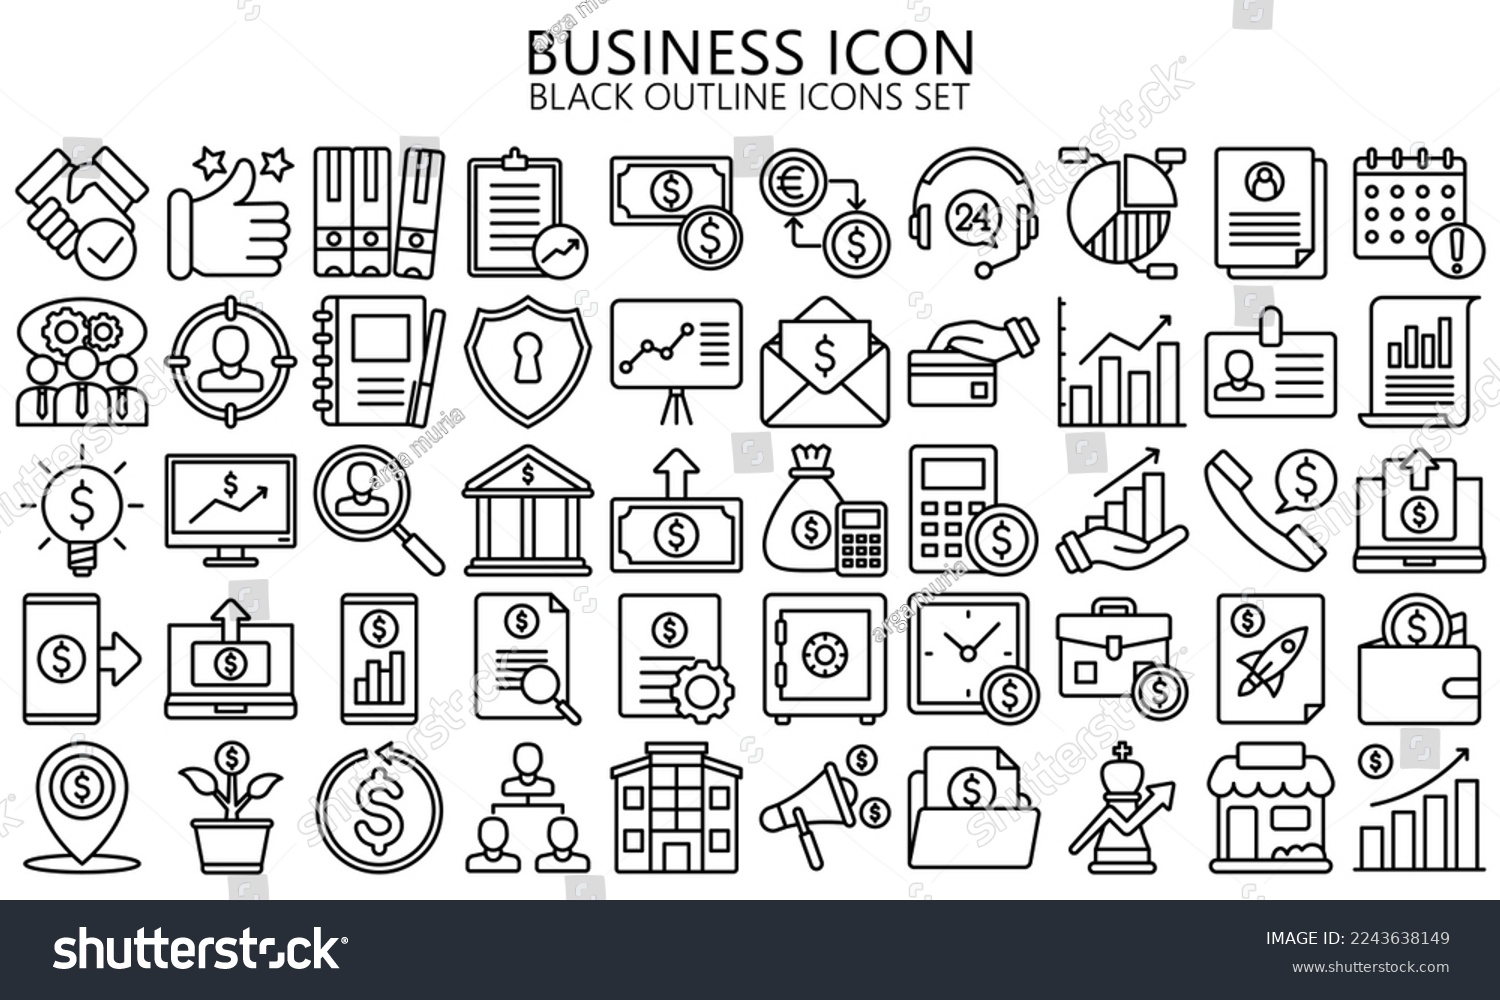 SVG of Business and finance black outline icon set. contain diagram, idea, money, marketing, strategy, and more. vector EPS 10 ready convert to SVG. use for modern concept, UI or UX kit and app svg